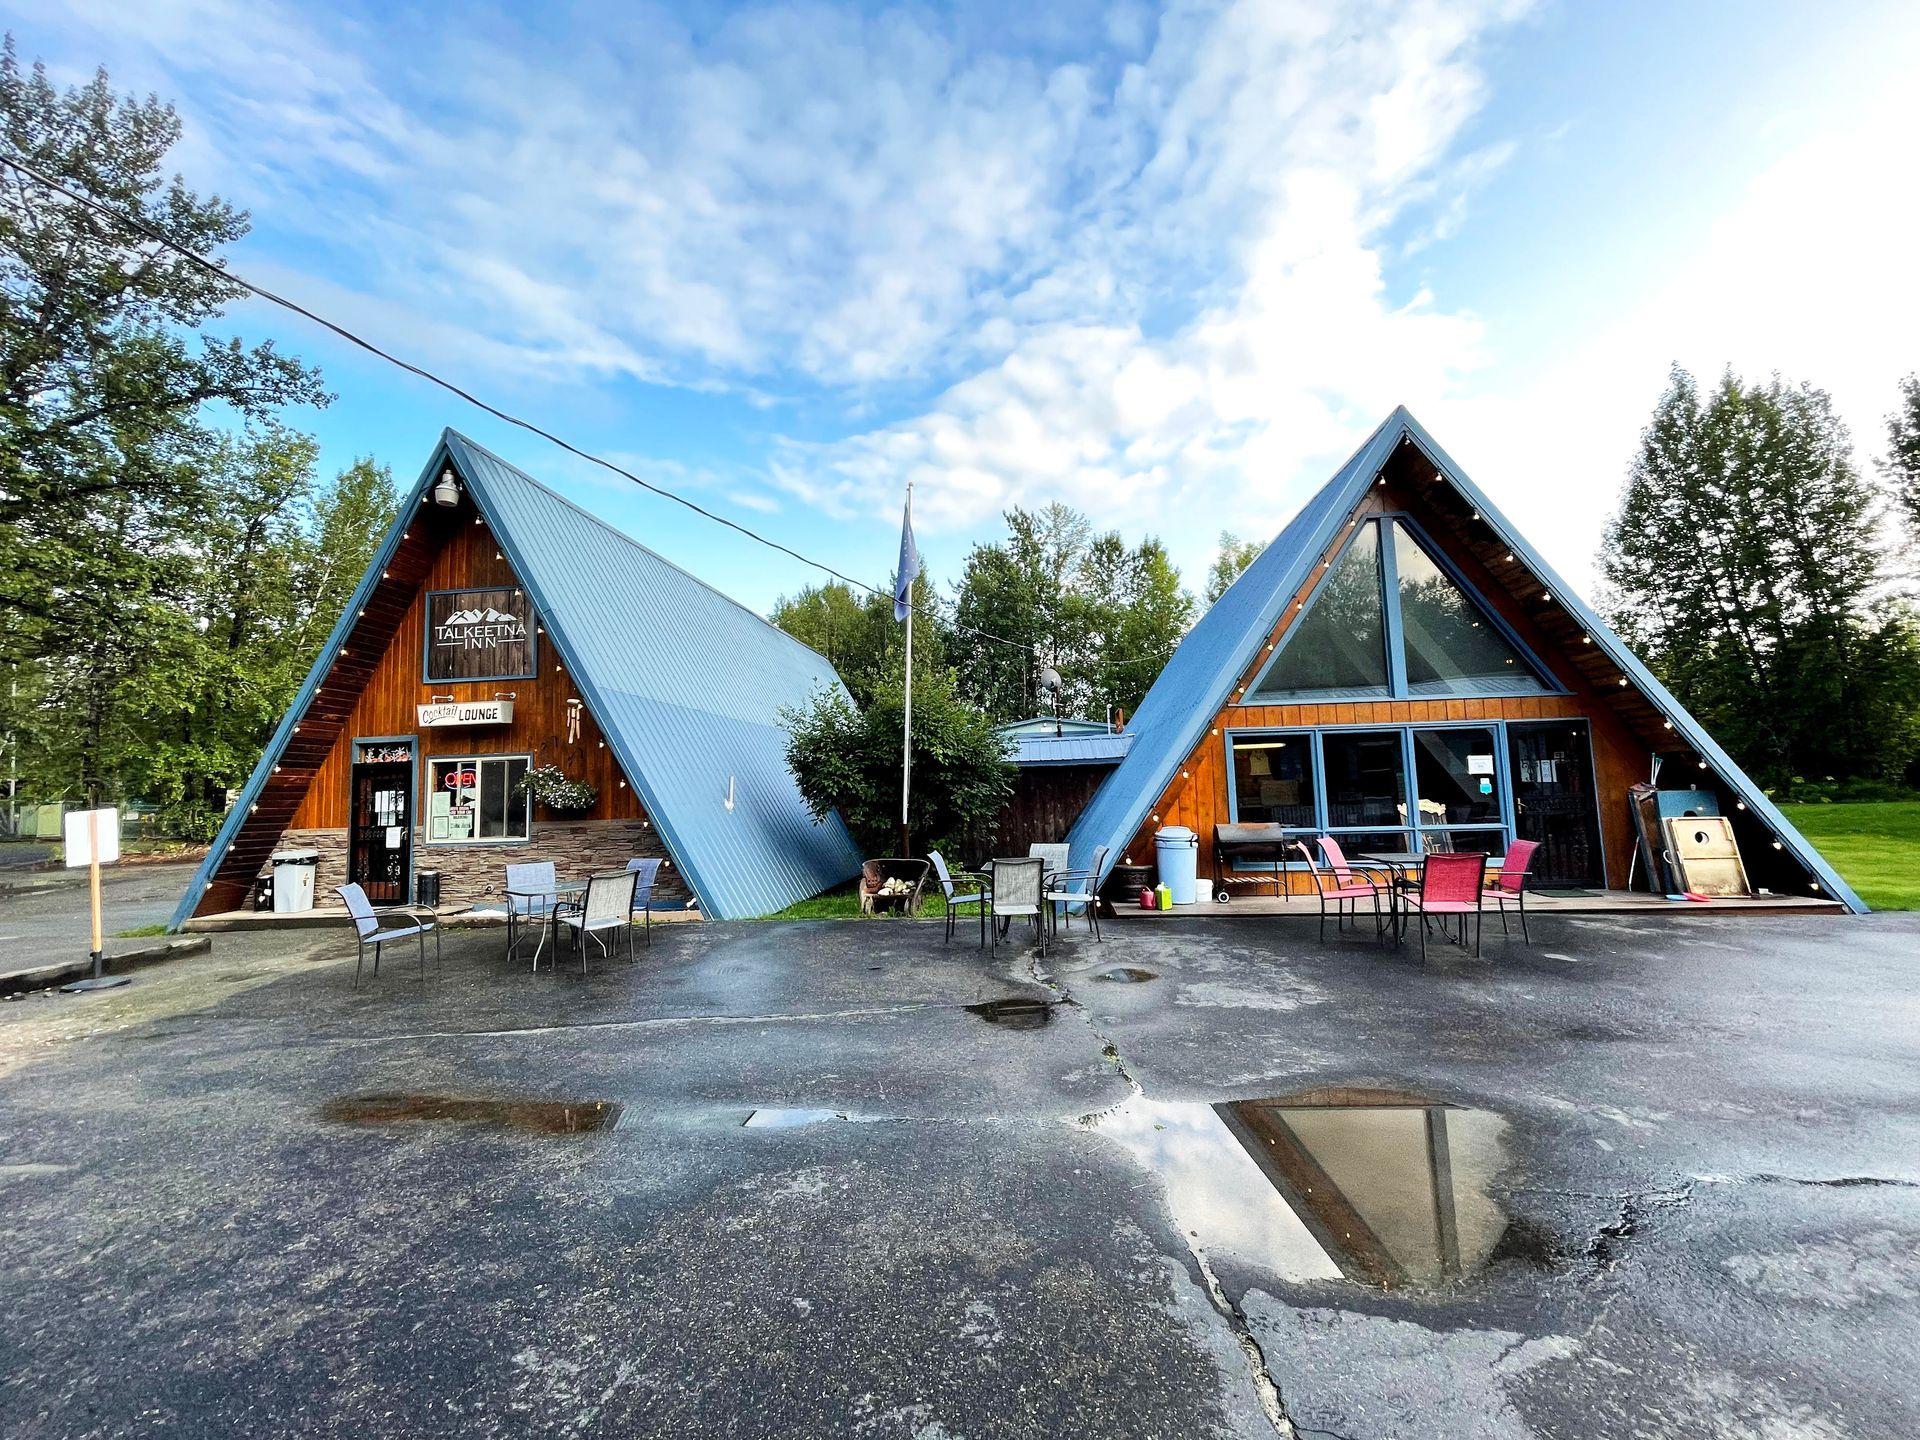 Two A-Frame buildings that make up the offices of the Talkeetna Inn.